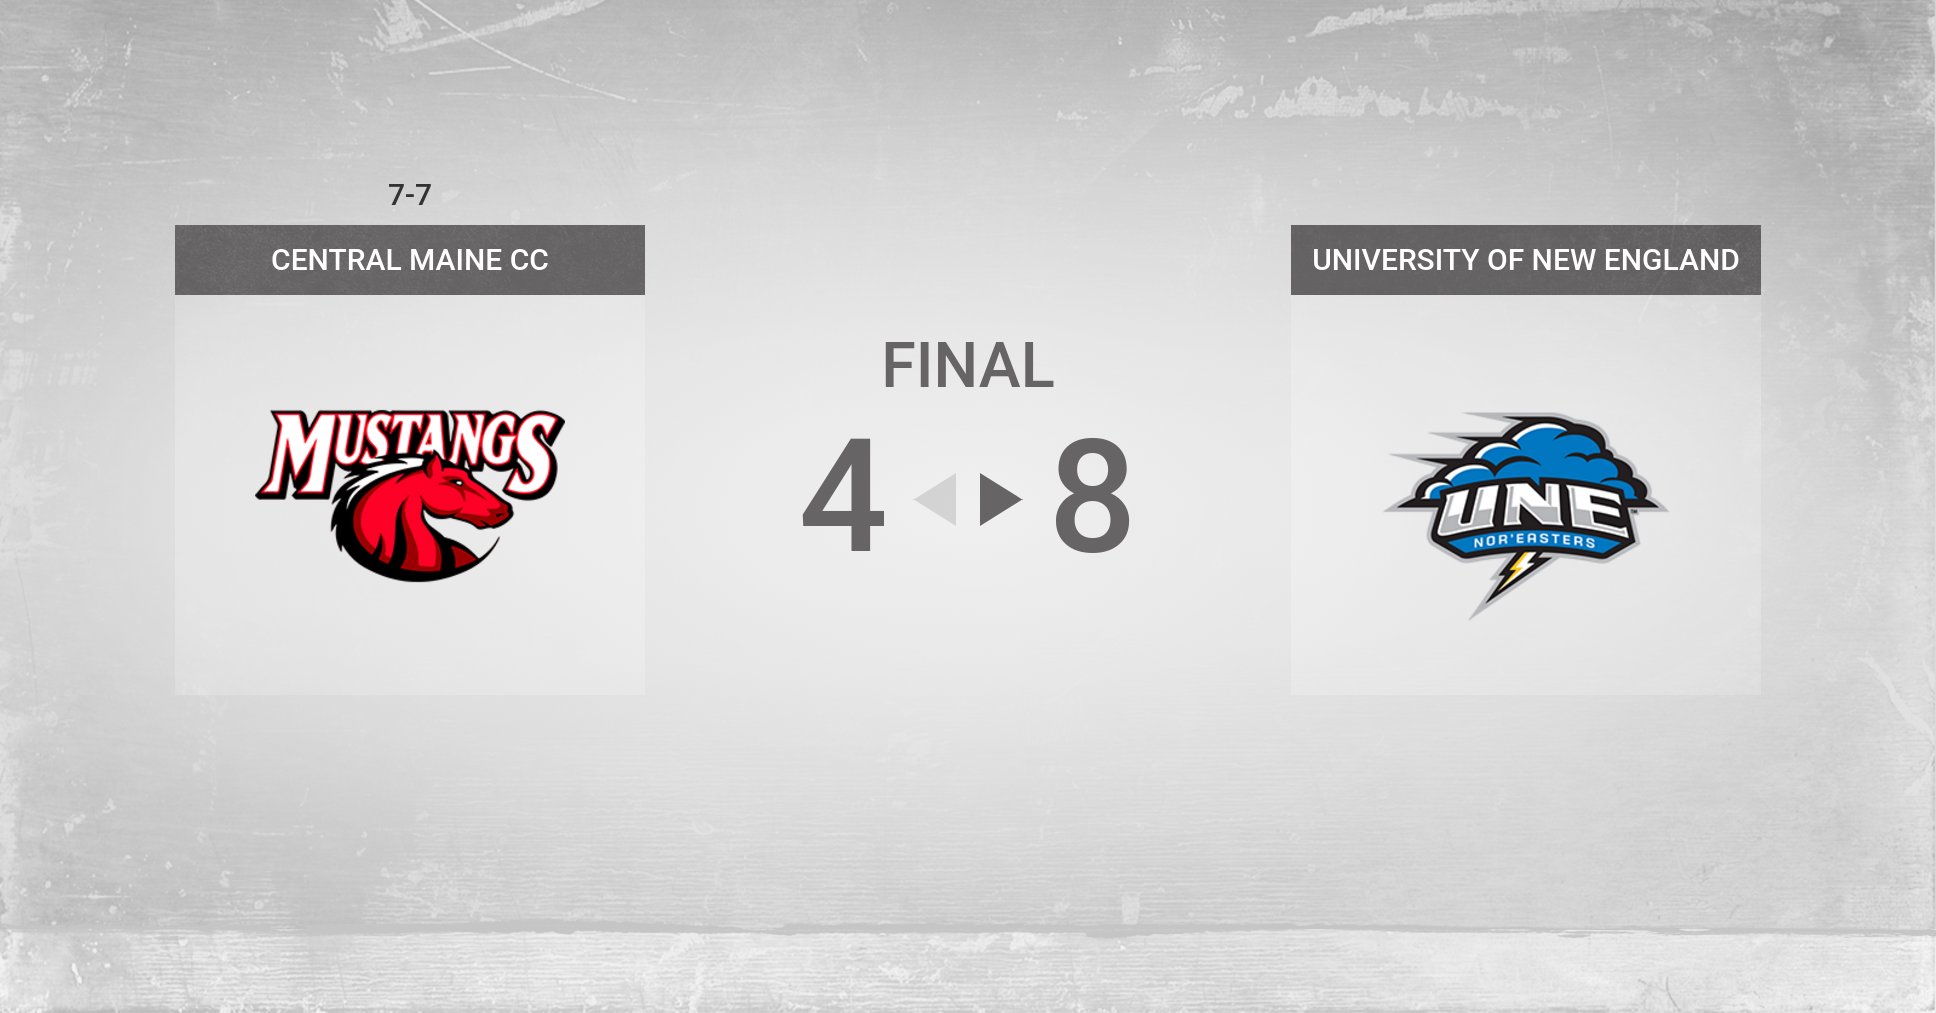 Mustangs Get Spanked by UNE 8-4